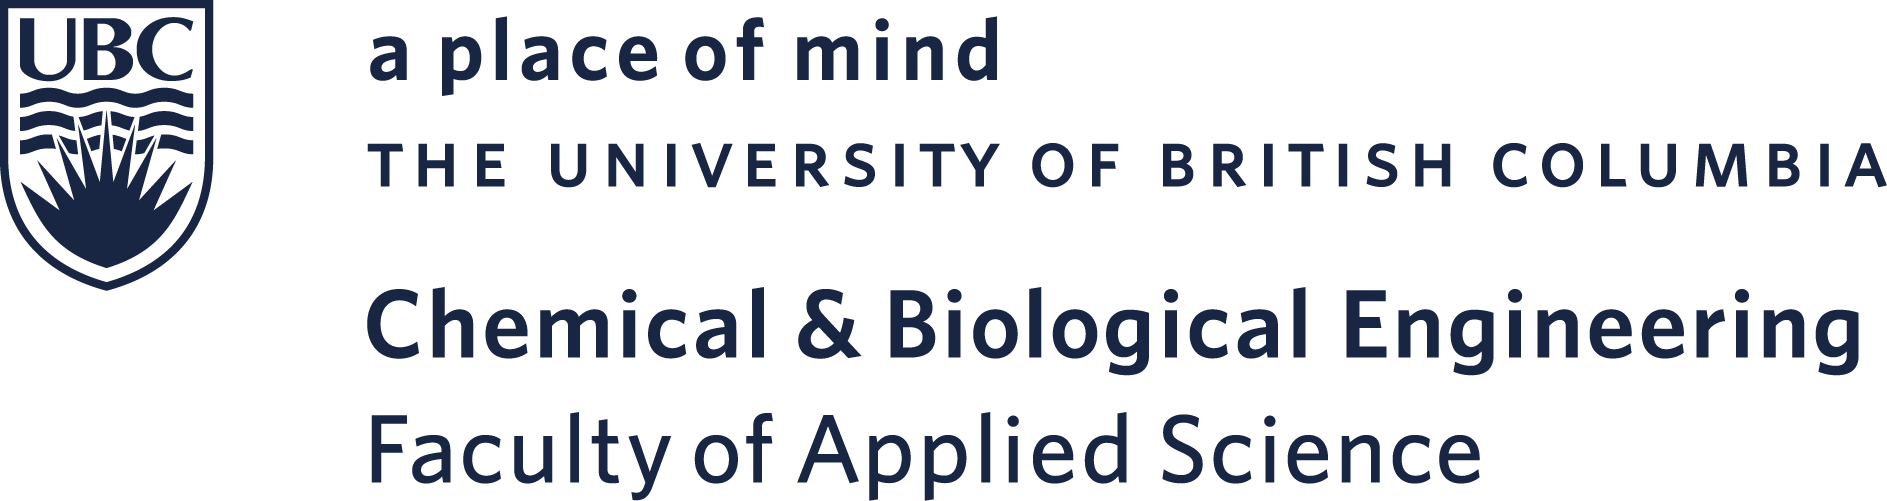 UBC Chemical and Biological Engineering